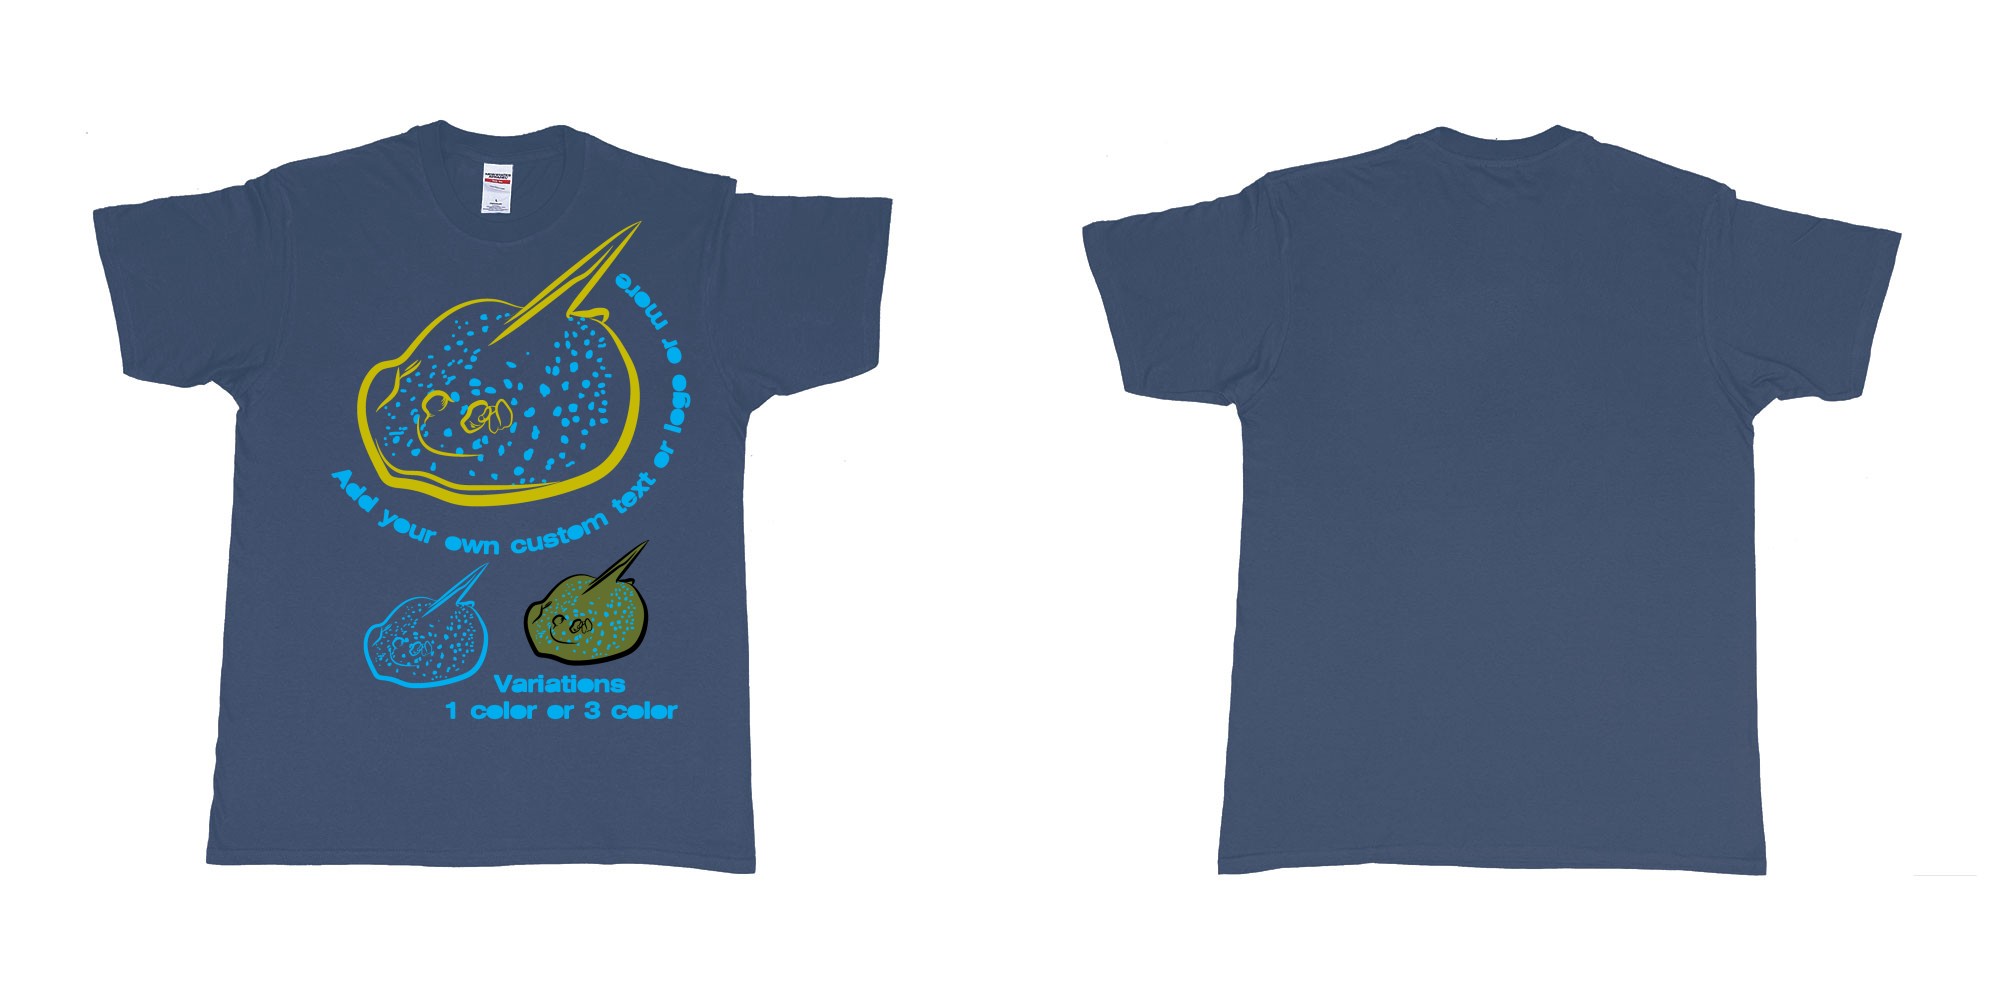 Custom tshirt design blue spotted stingray in fabric color navy choice your own text made in Bali by The Pirate Way